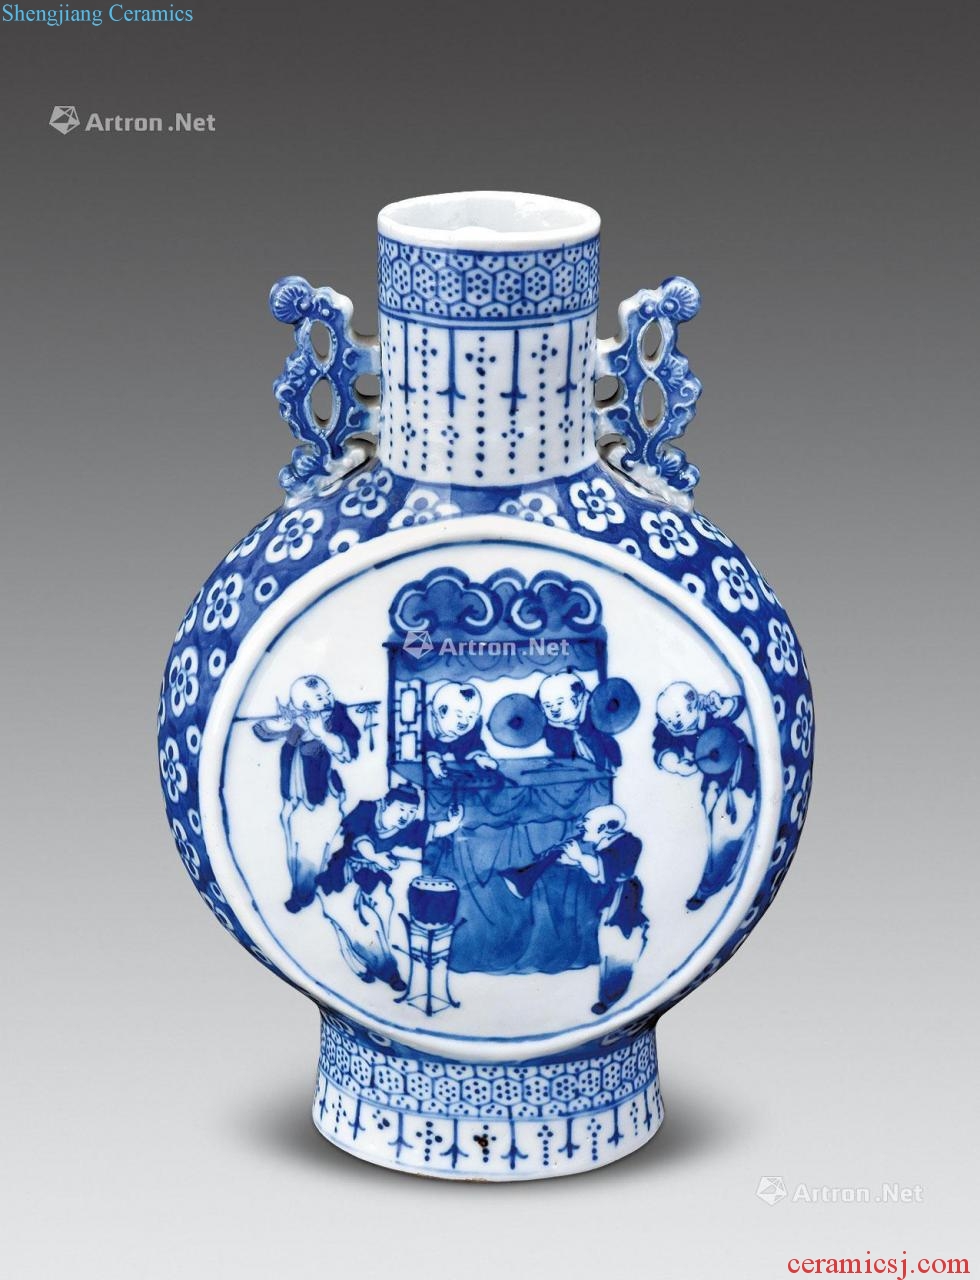 In the qing dynasty Blue and white medallion characters tattooed on bottles